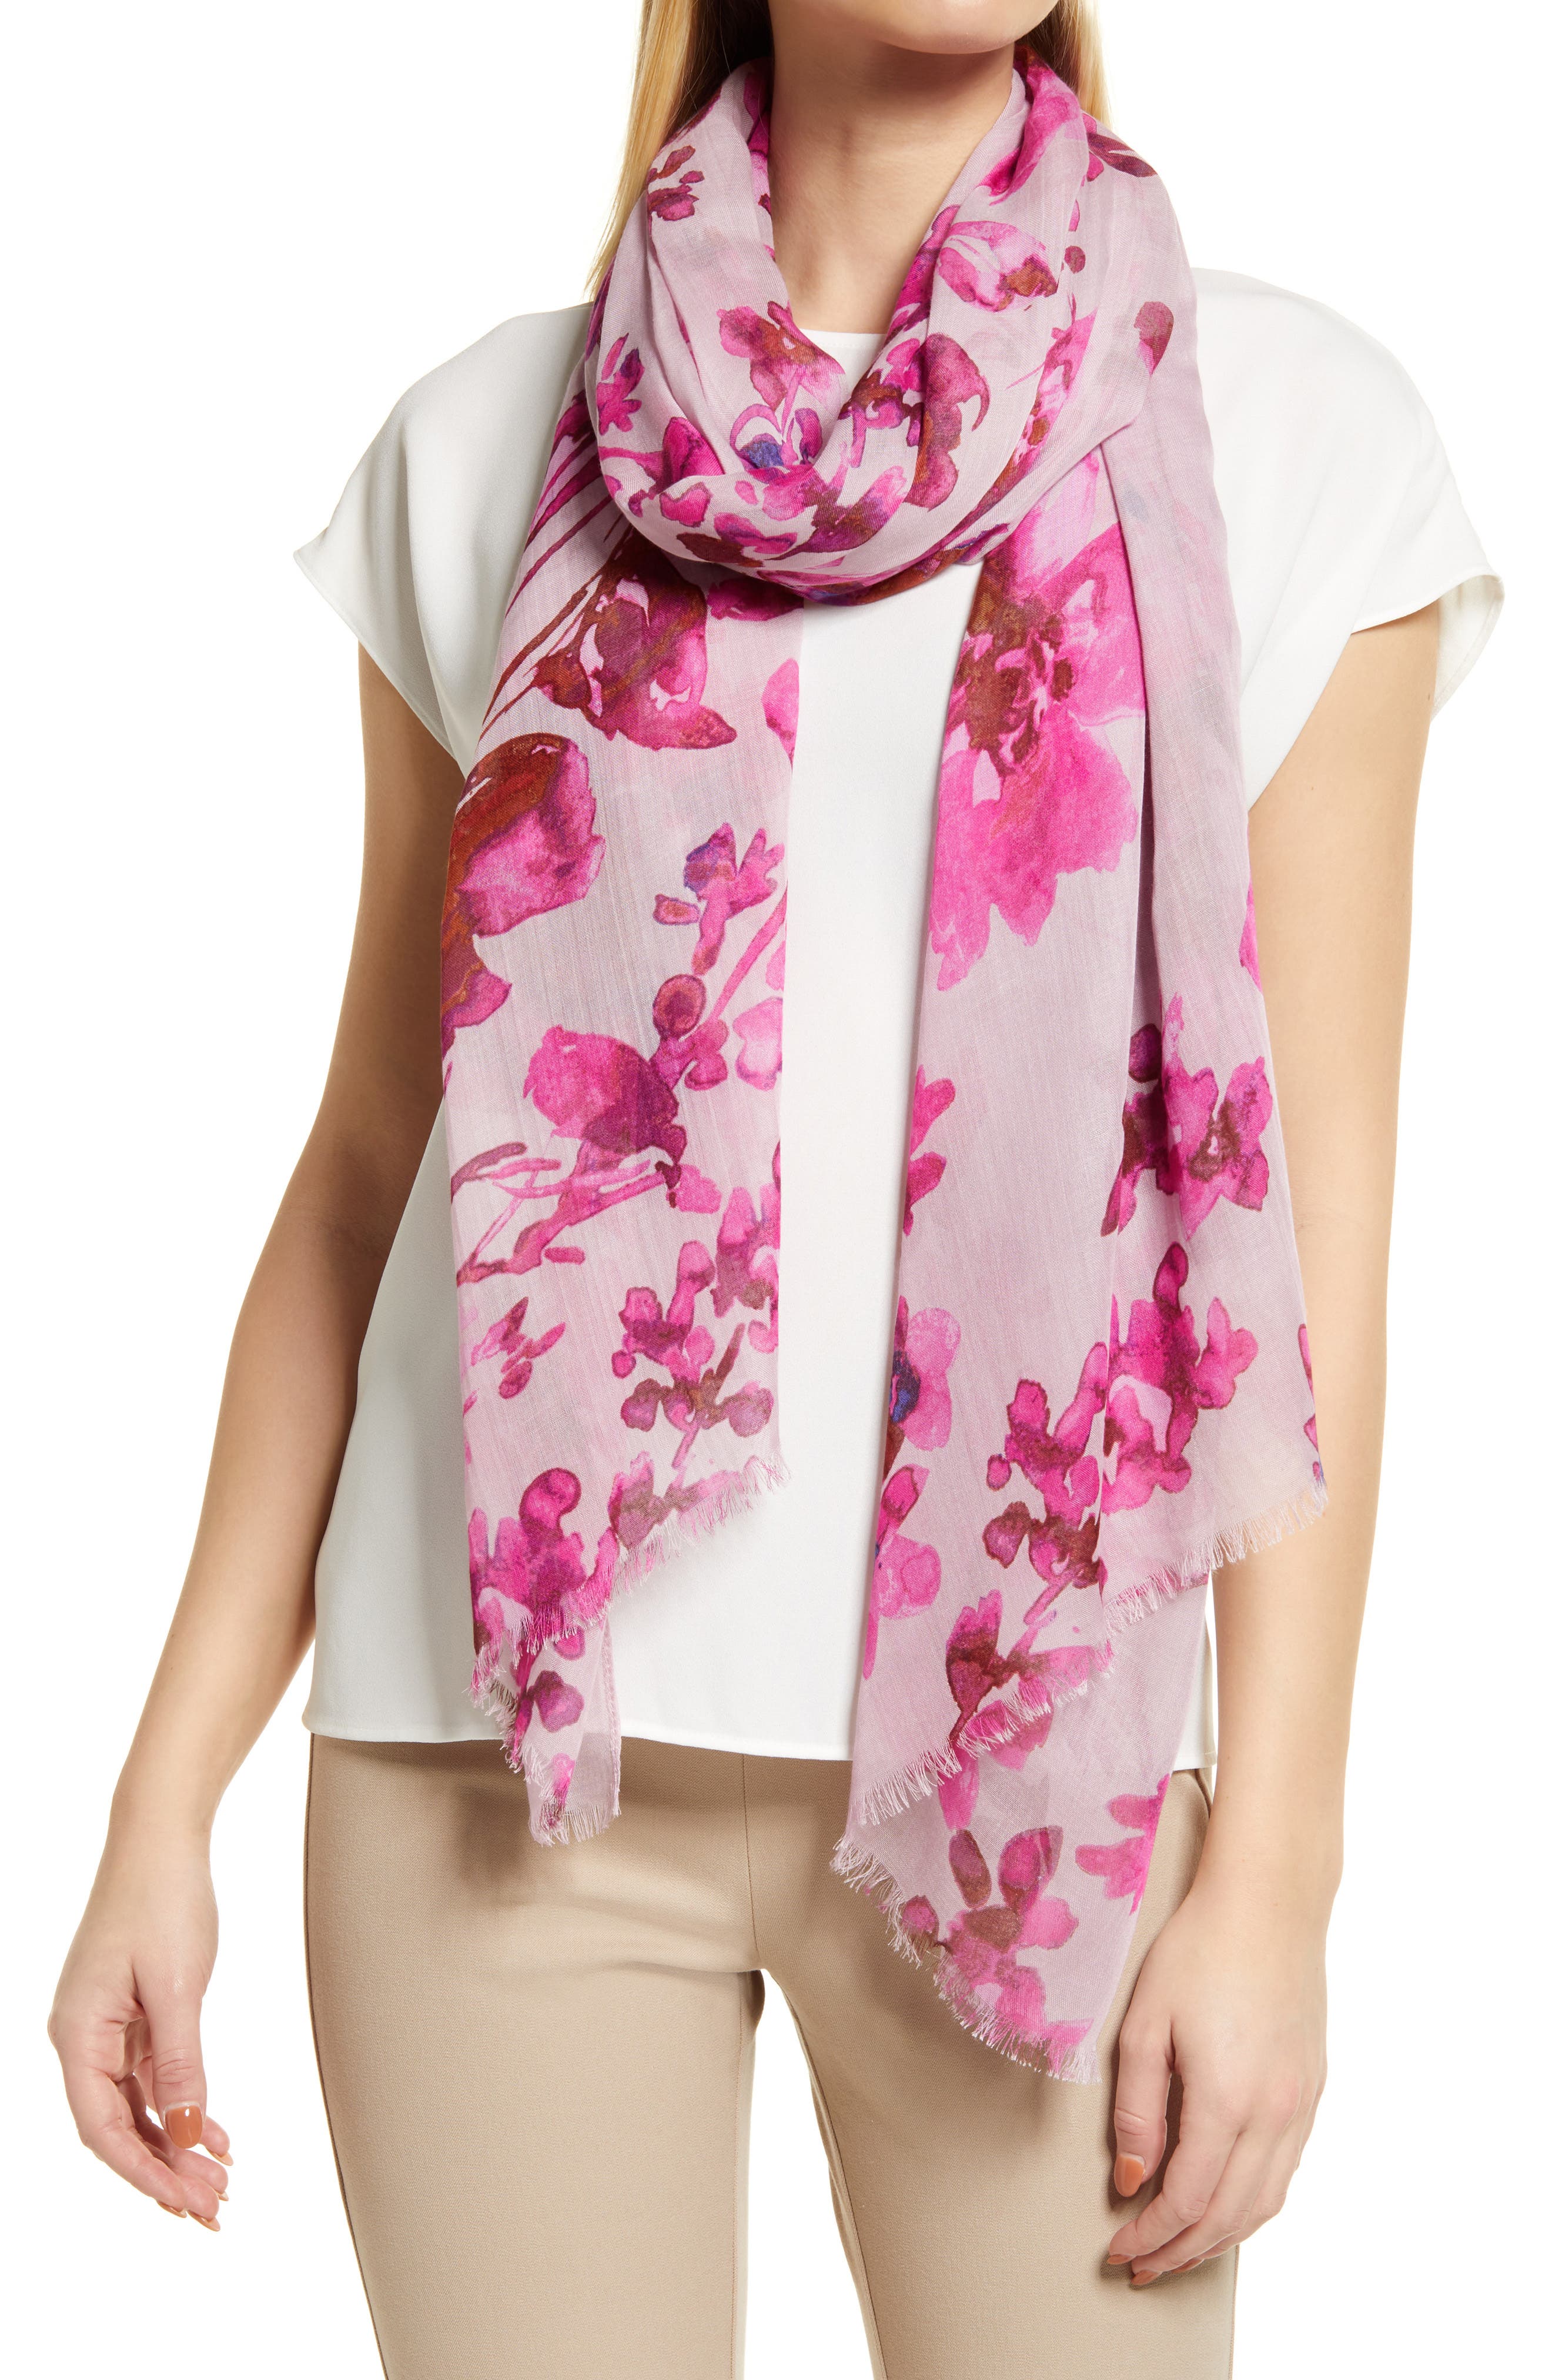 Vintage pink scarf flowered headscarf made of chiffon.